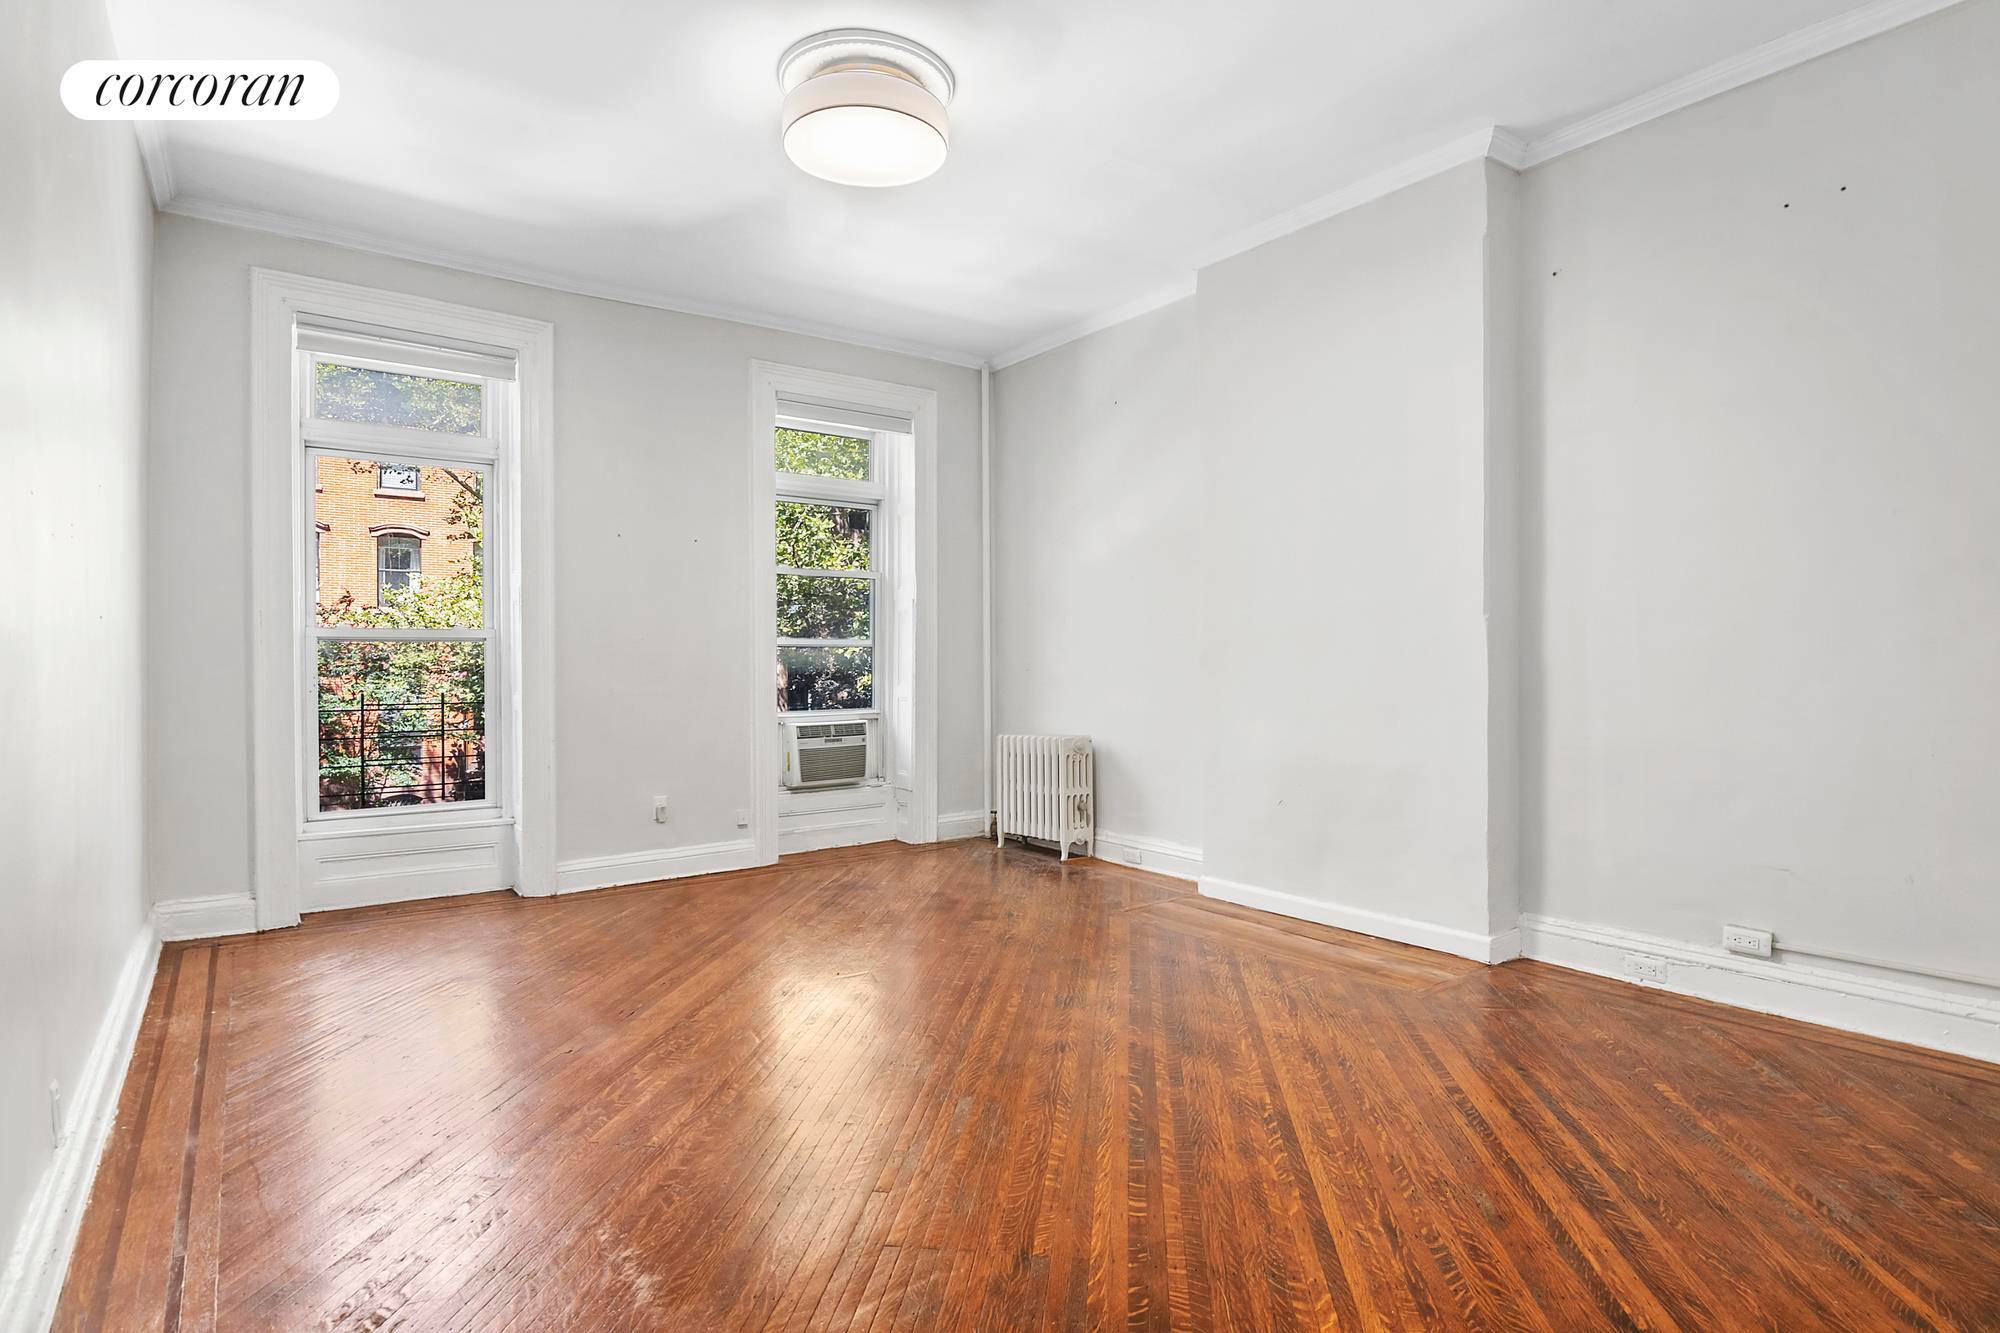 CENTERED. 12 Leffets Pl, 1 Clinton Hill, Brooklyn has been known as the center of Brooklyn's social scene and this charming and spacious 2BR 1.